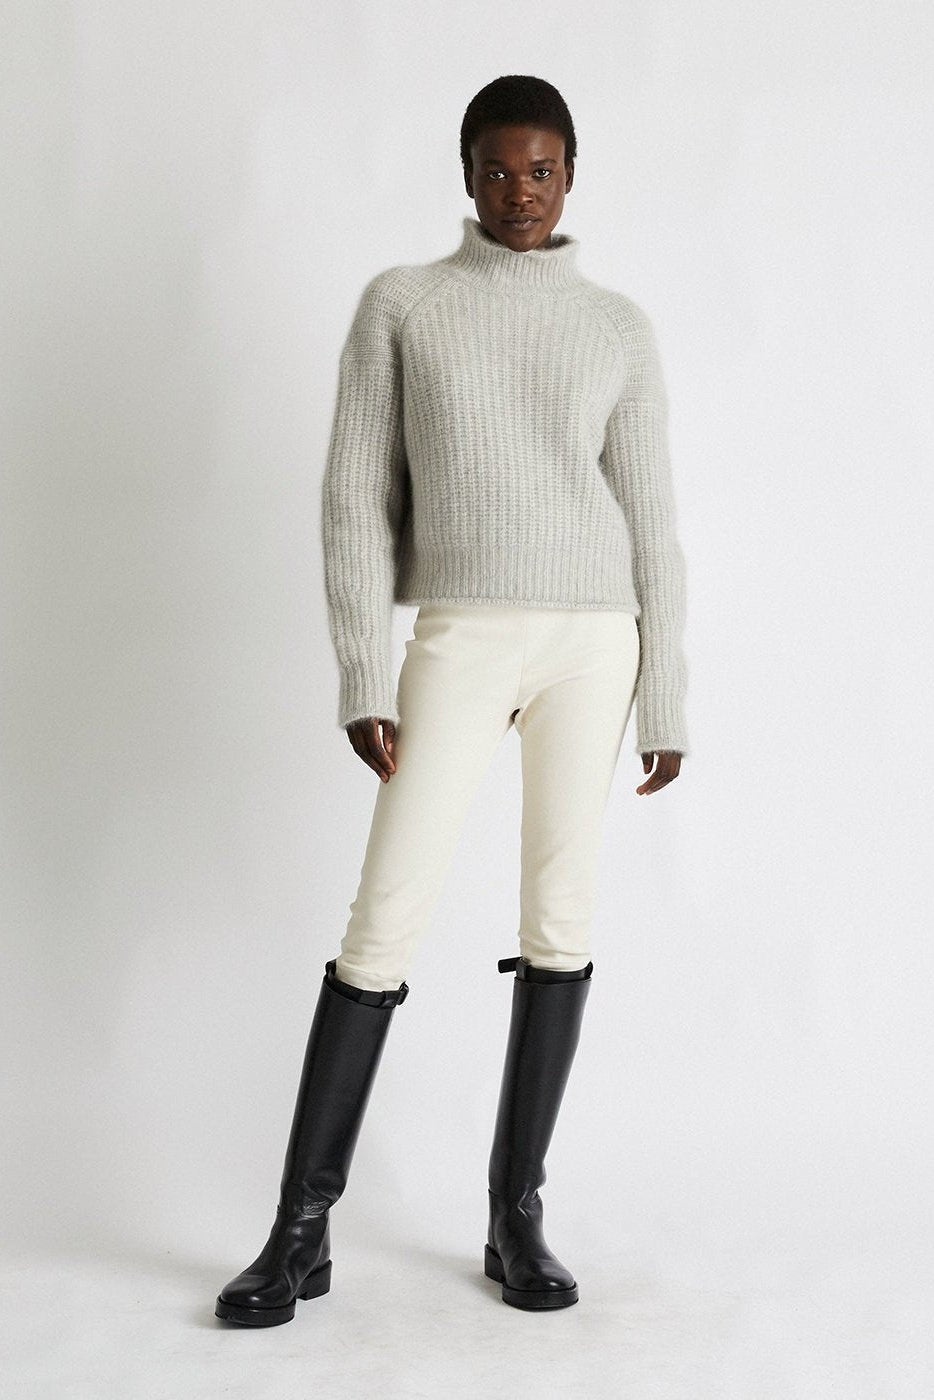 + Beryll Carole Cashmere Sweater | Shell Gray - +Beryll Cashmere Sweater Carole | Shell Gray - +Beryll Worn By Good People